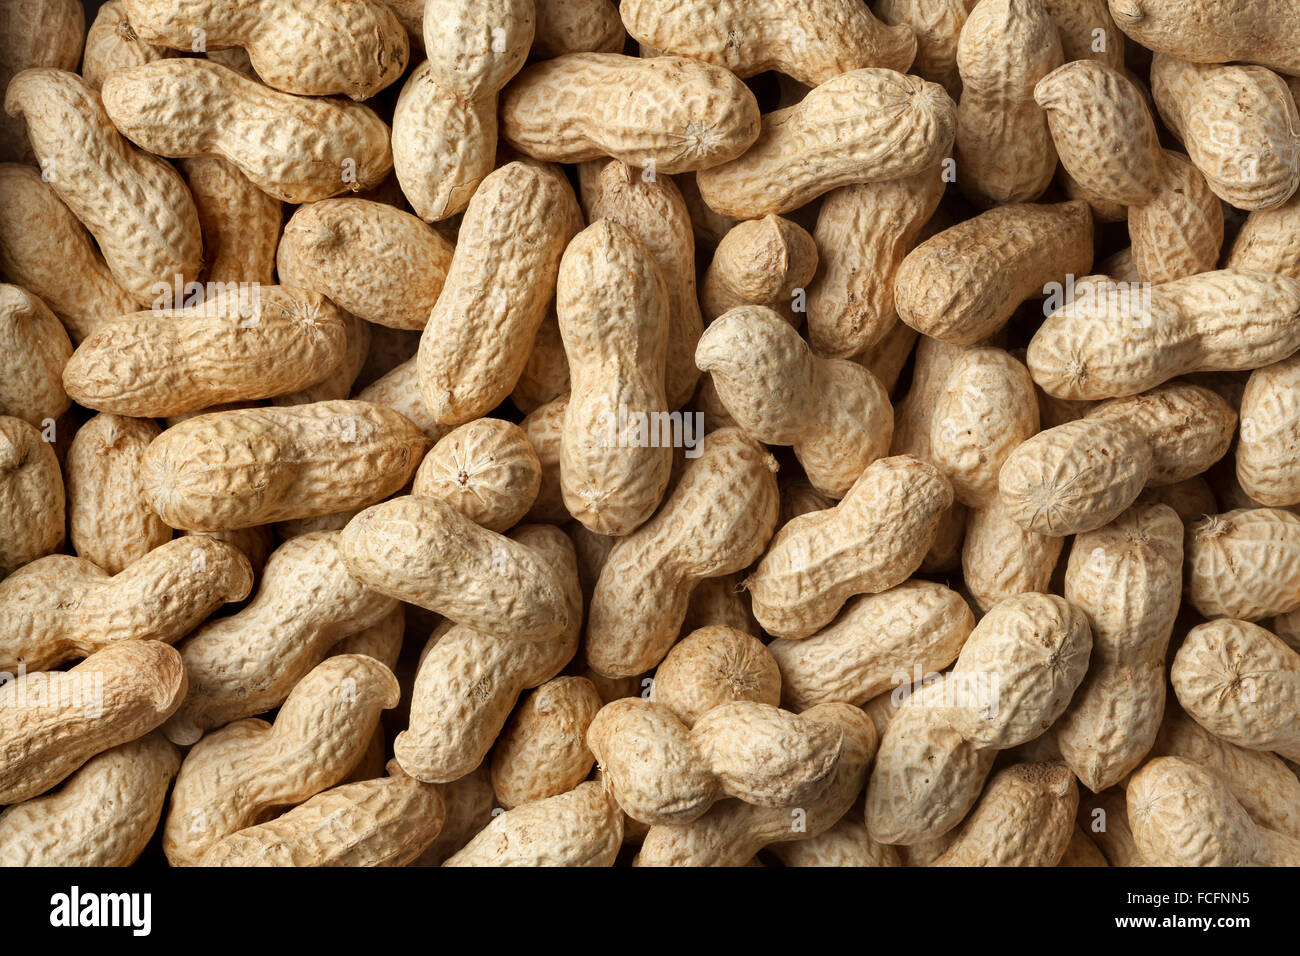 Roasted peanuts in the shell full frame close up Stock Photo